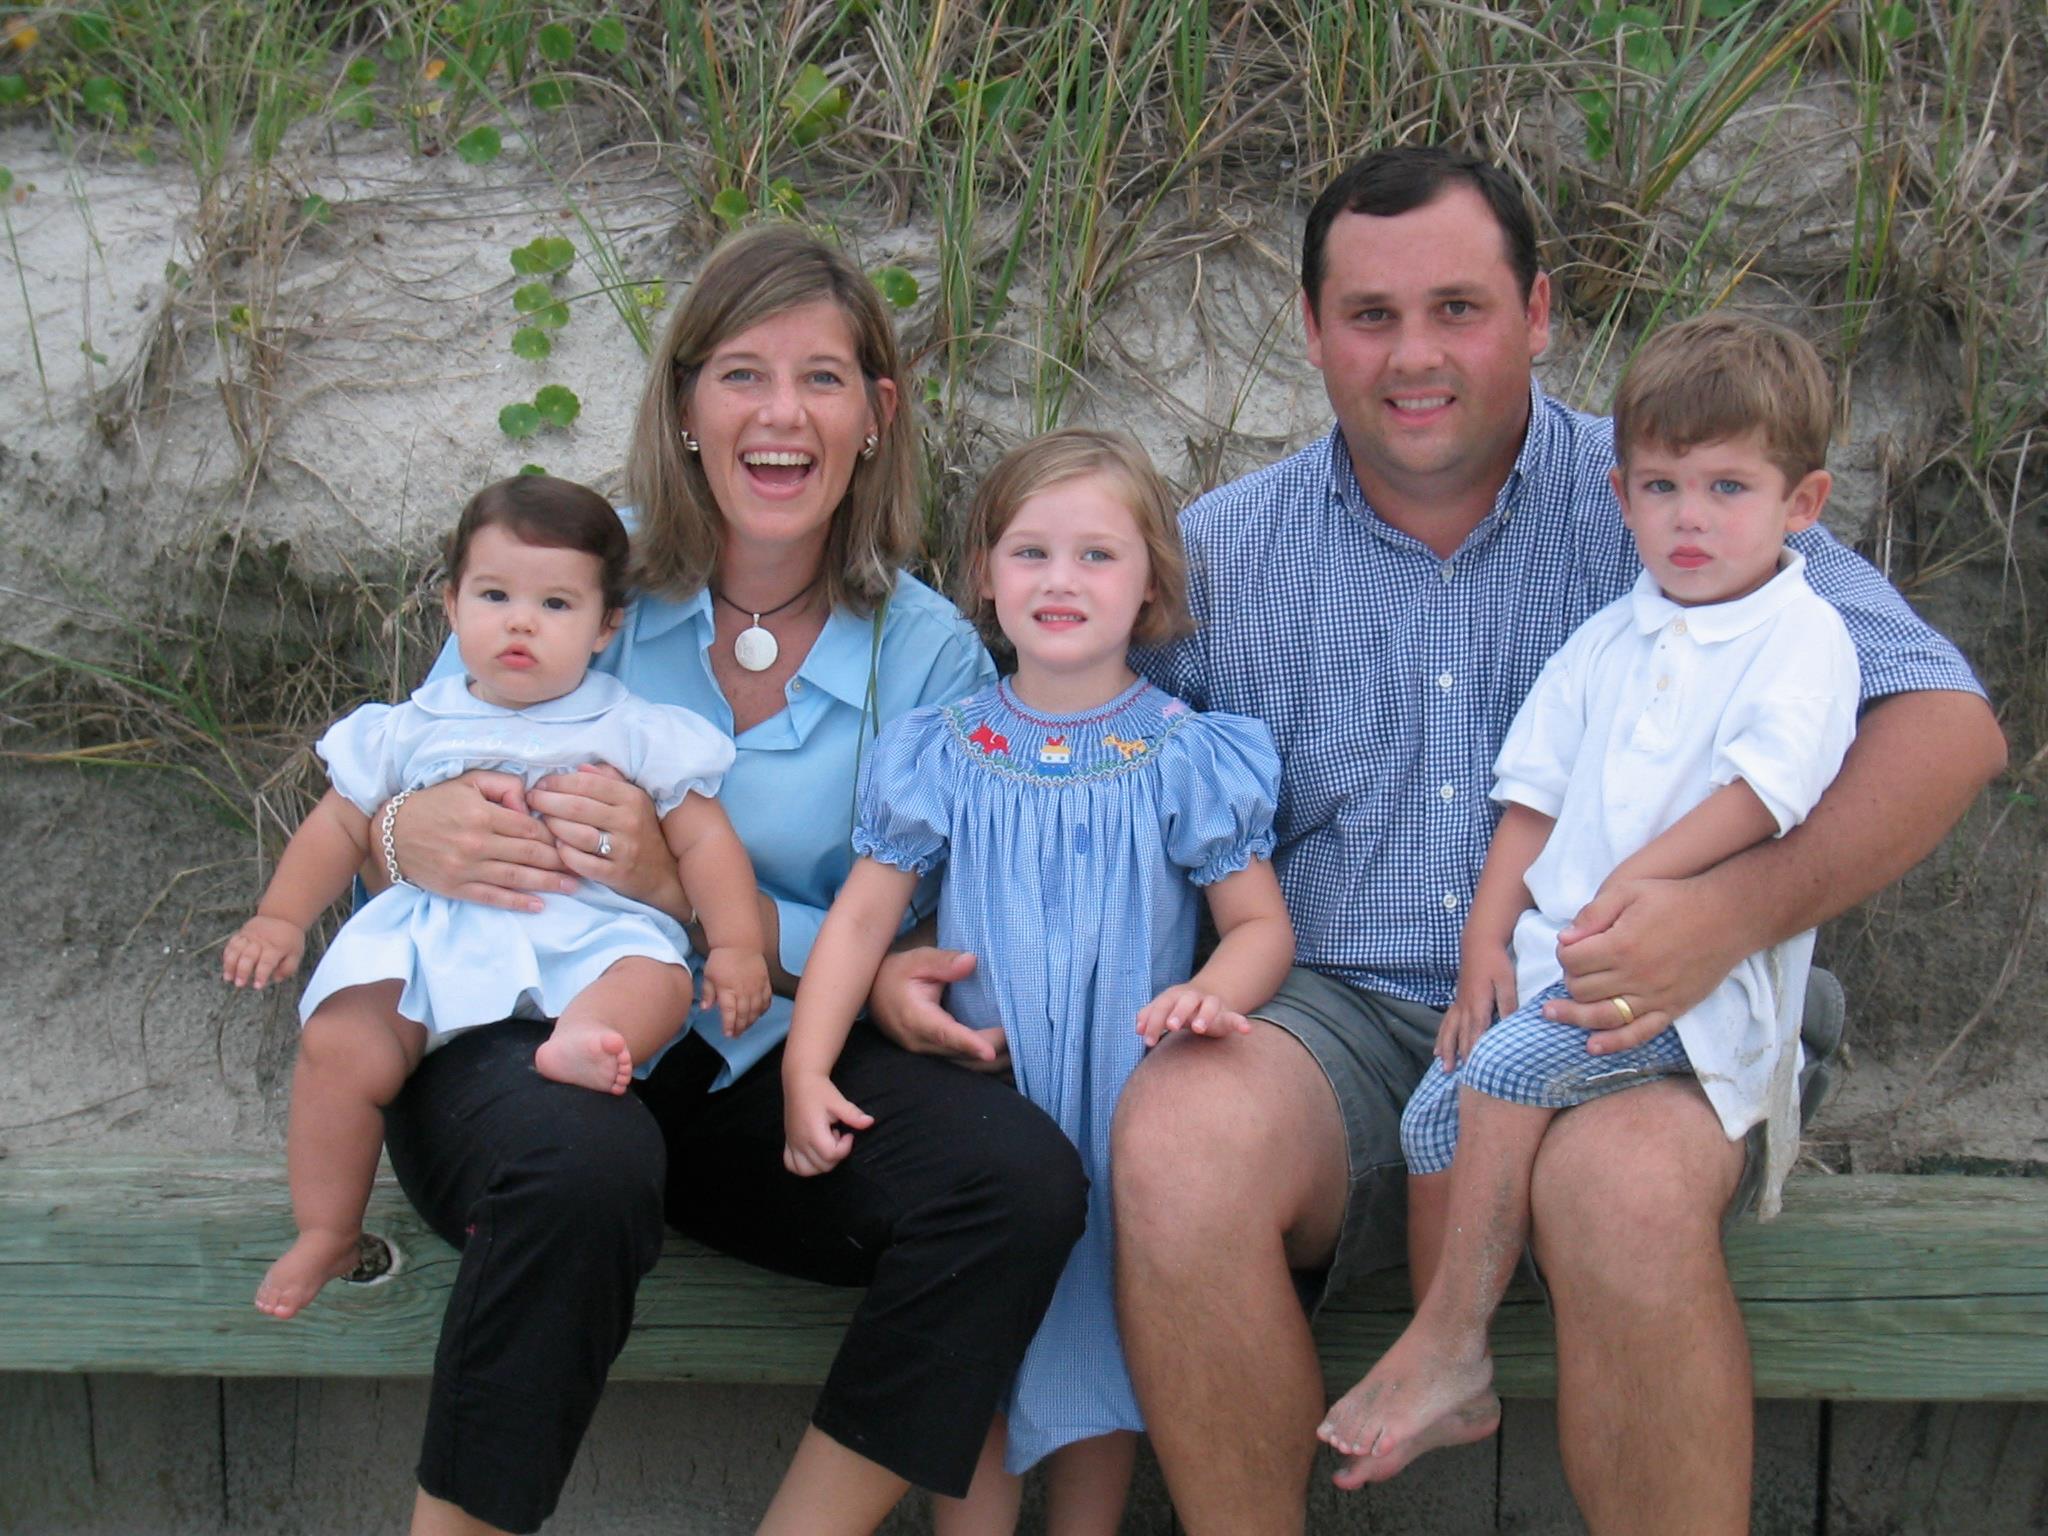 Tulane Alumni Linda Fisher Reese (NC '91) and Ted Reese (E '92) with their three children